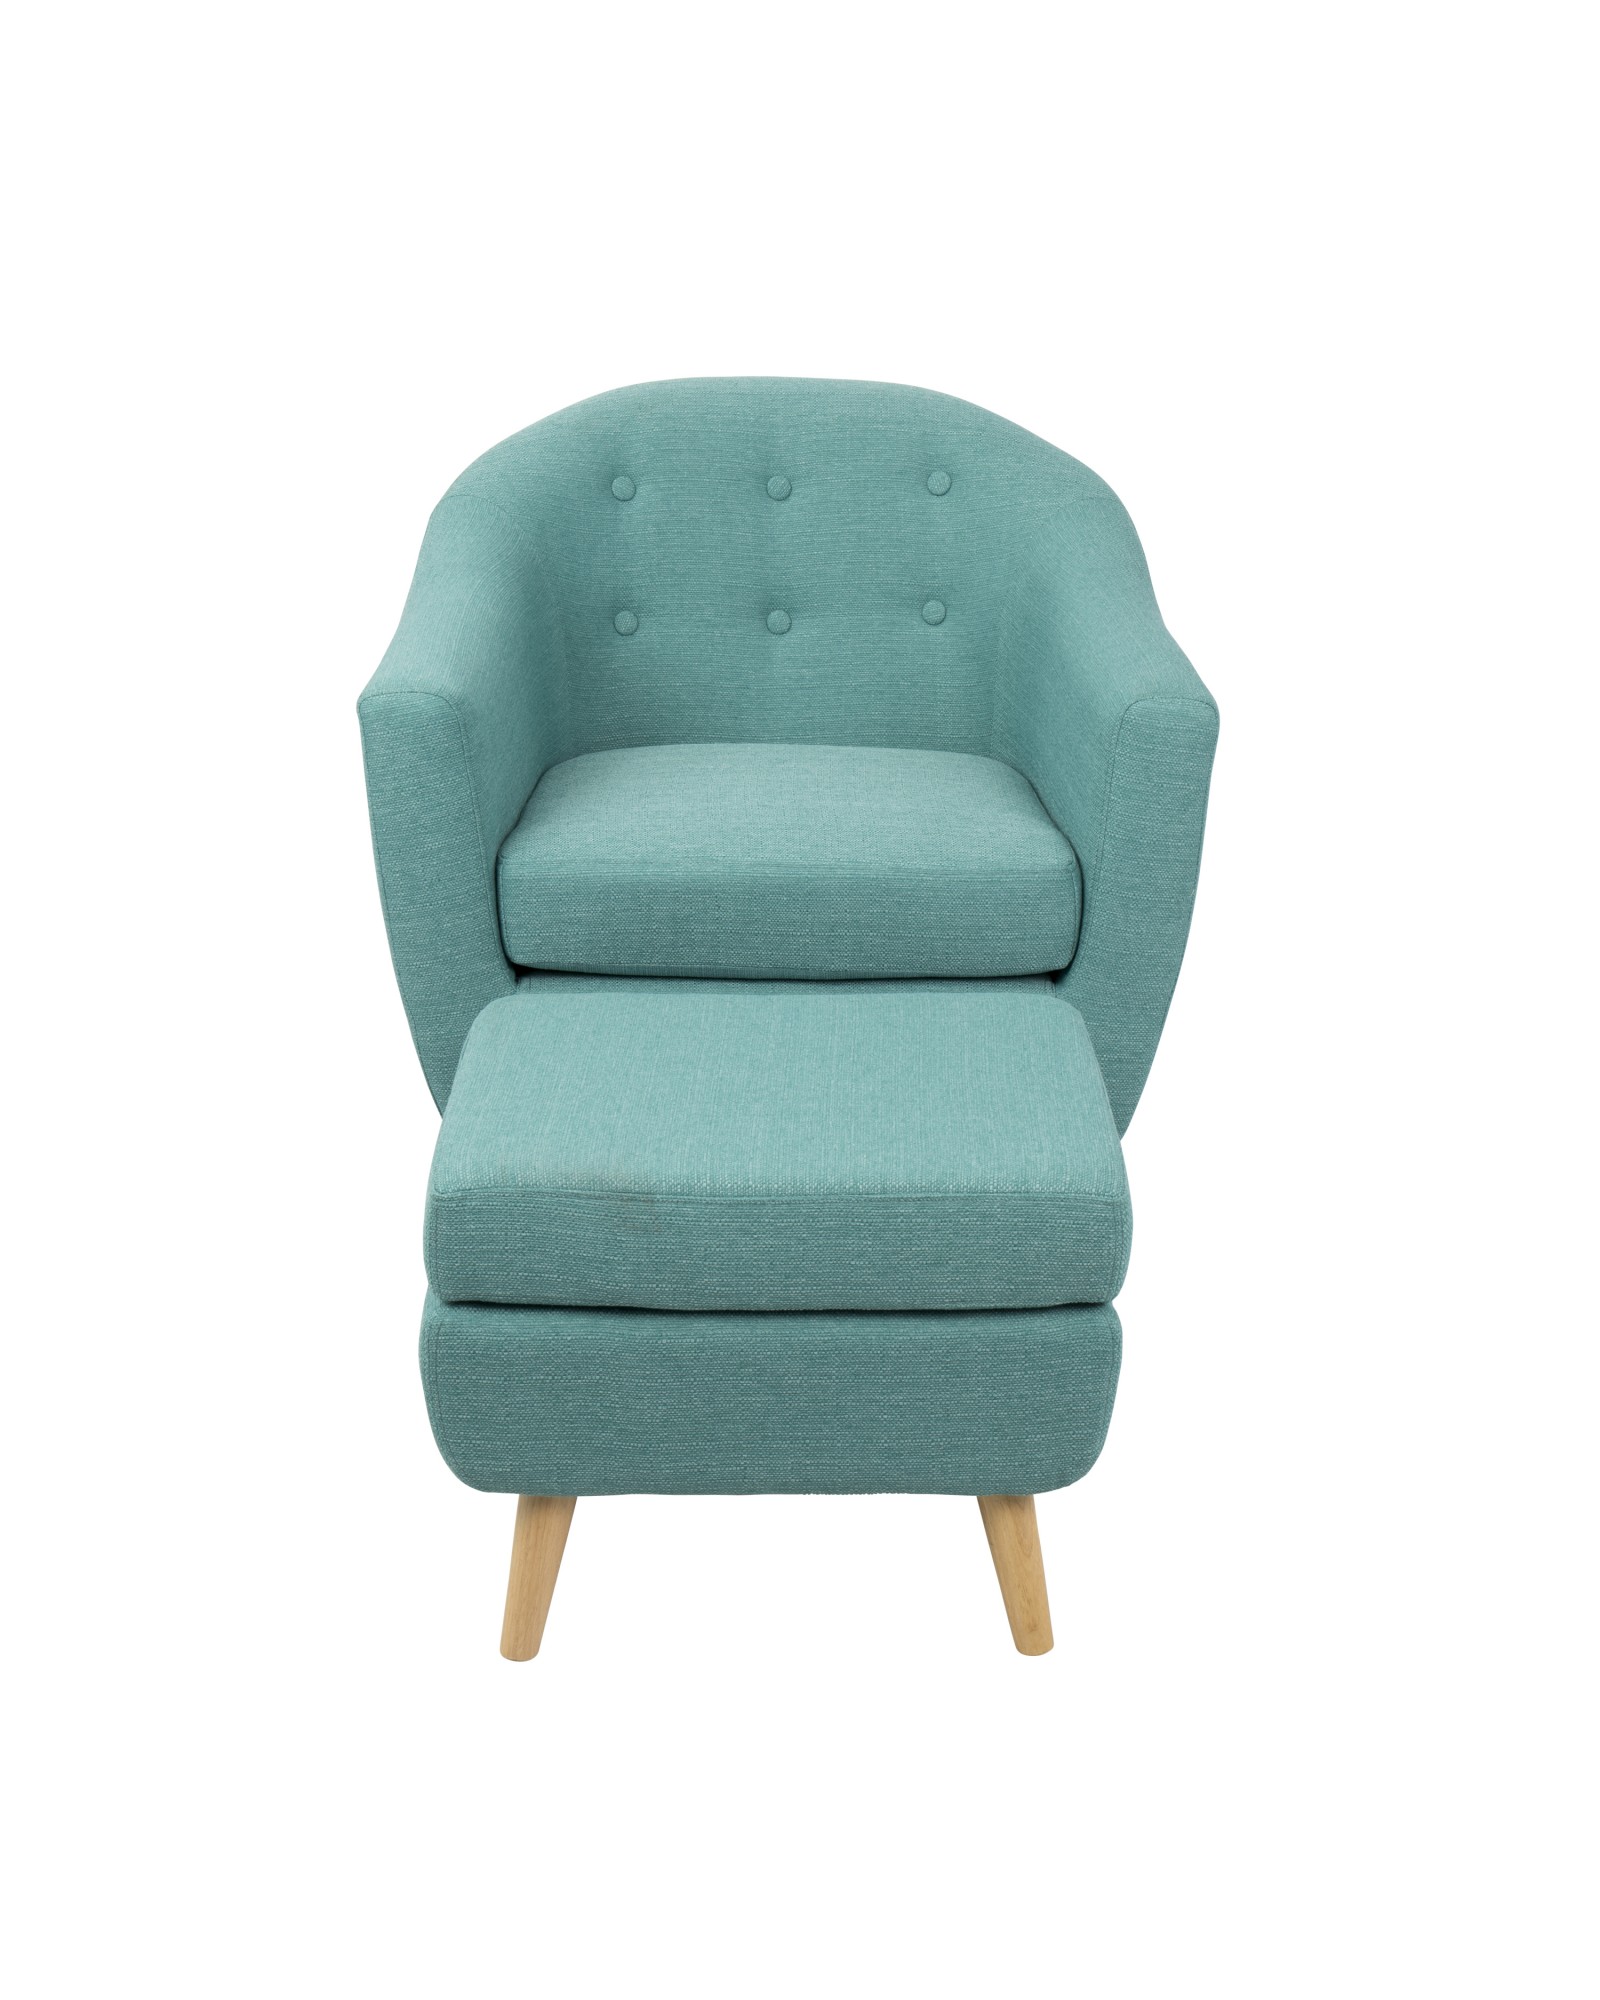 Rockwell Mid-Century Modern Accent Chair and Ottoman in Teal